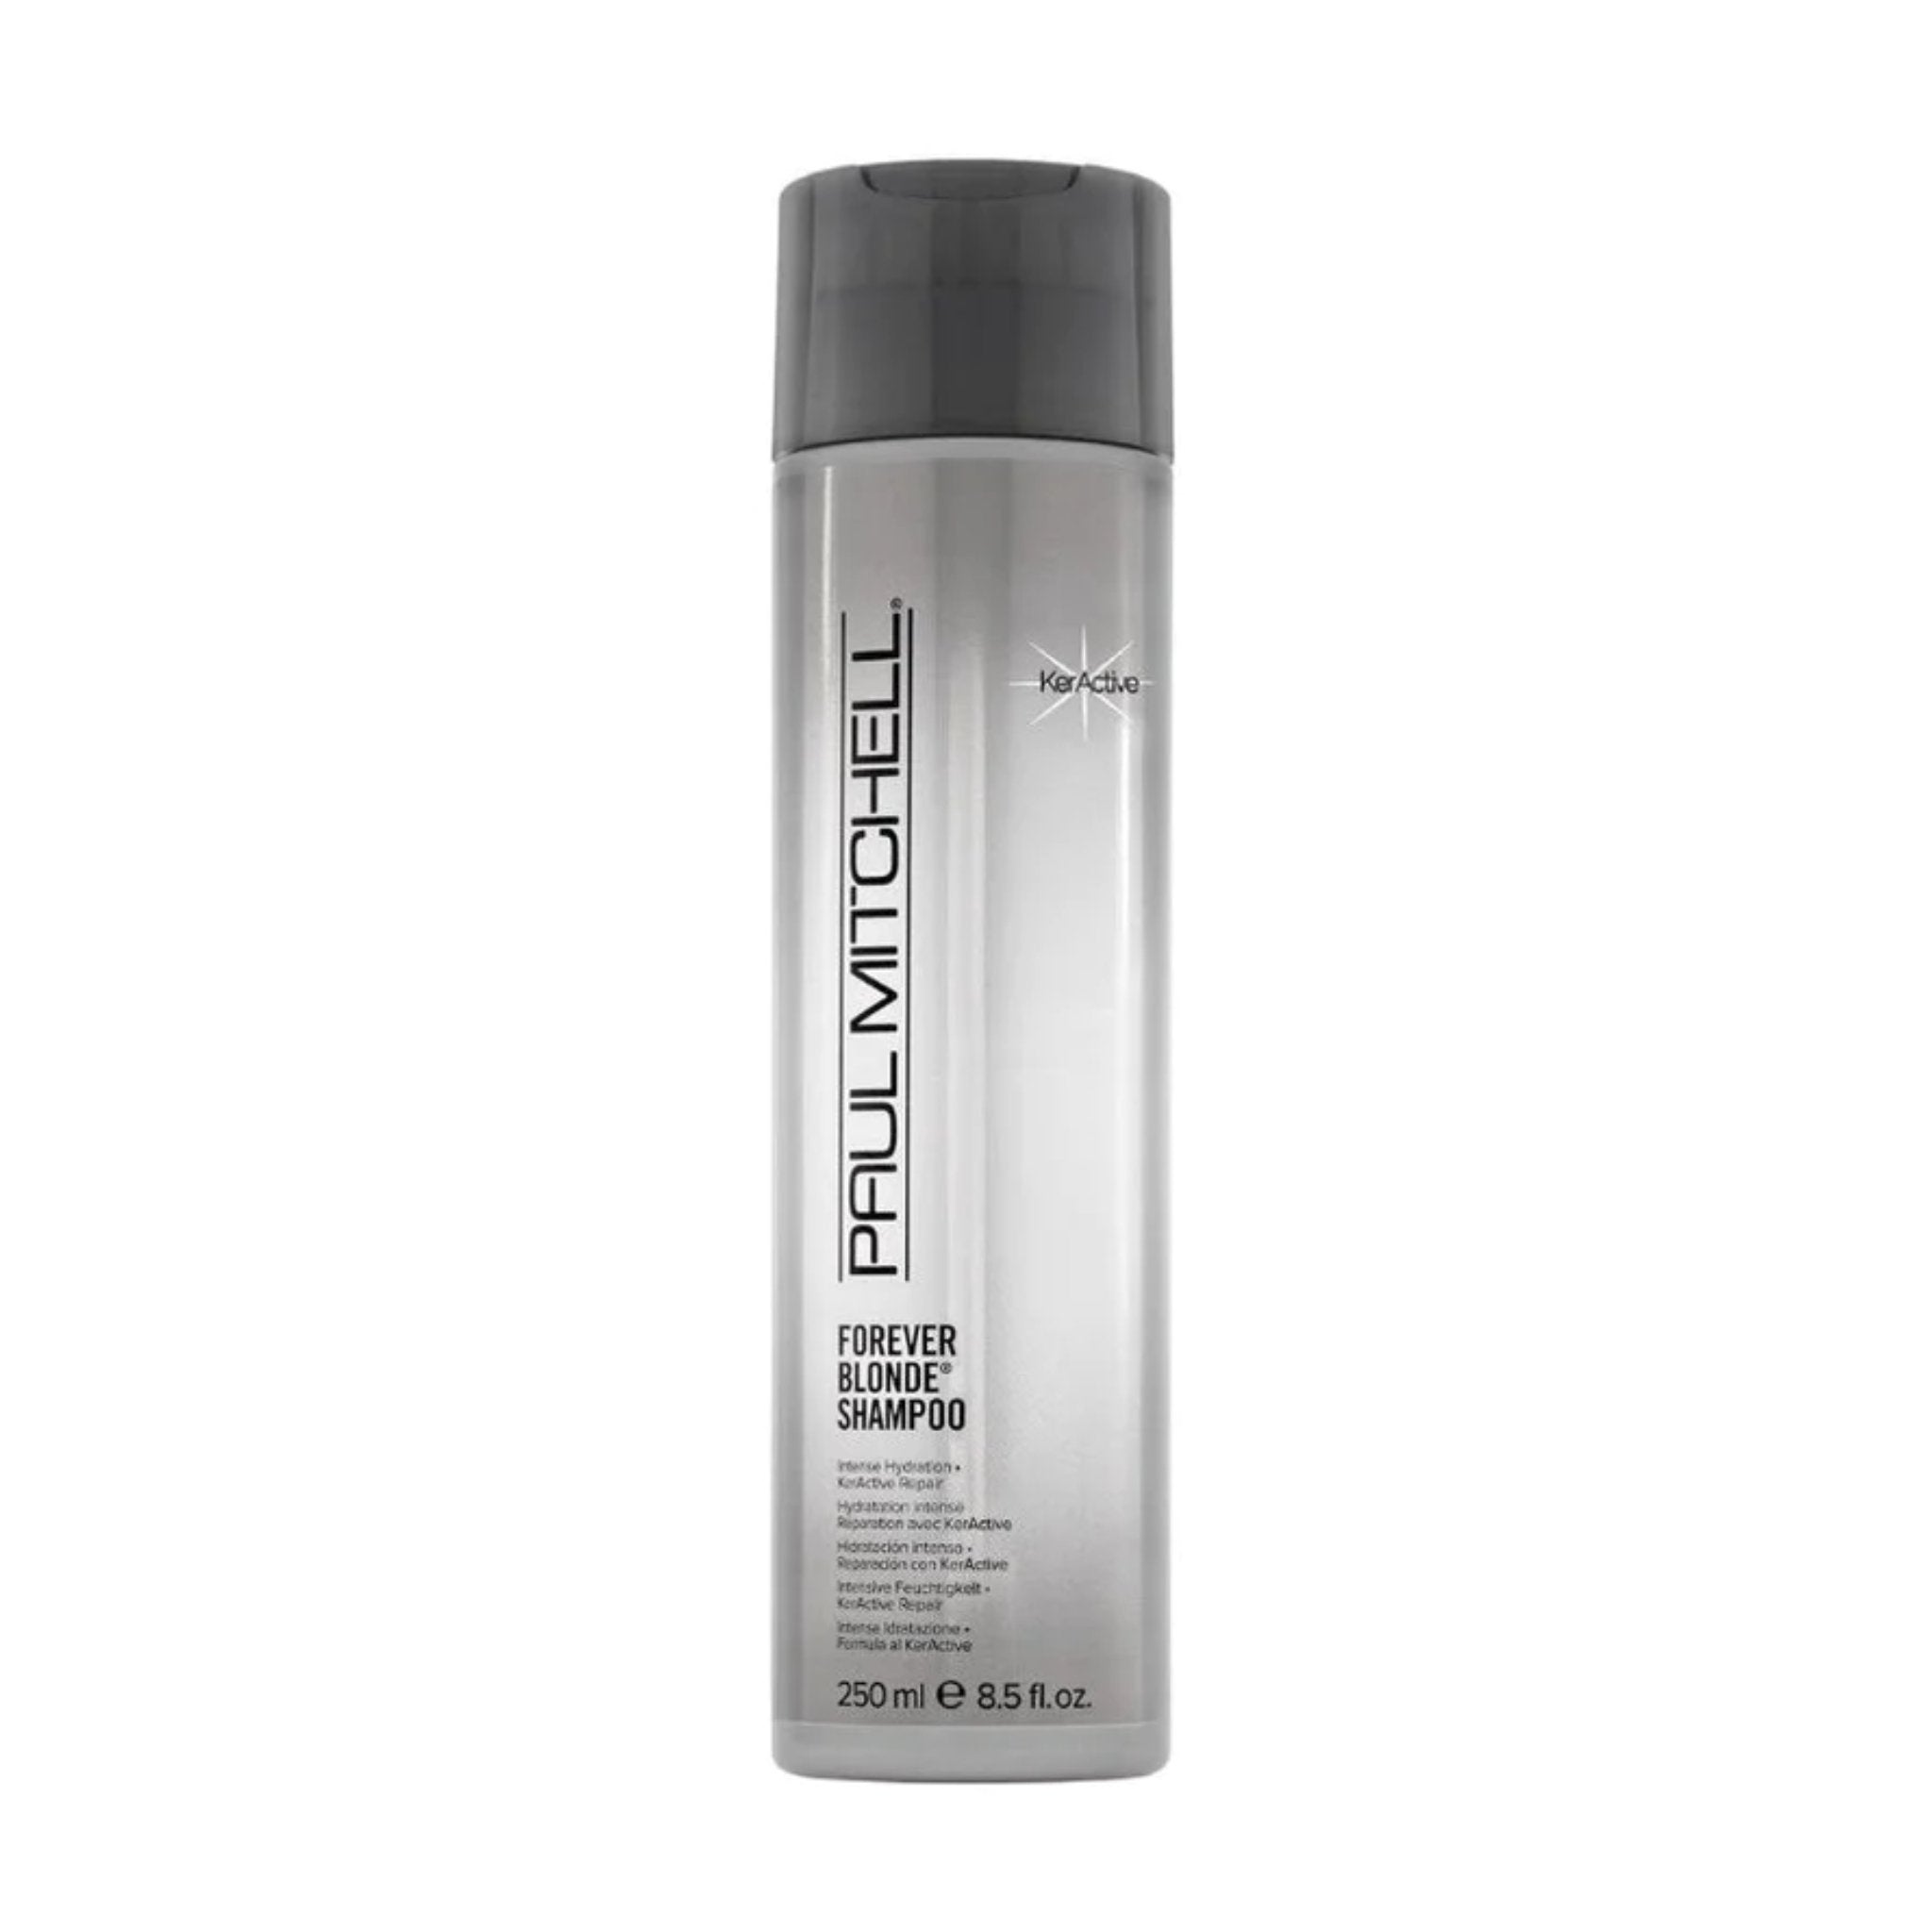 Paul Mitchell. Shampoing Forever Blonde - 250 ml - Concept C. Shop